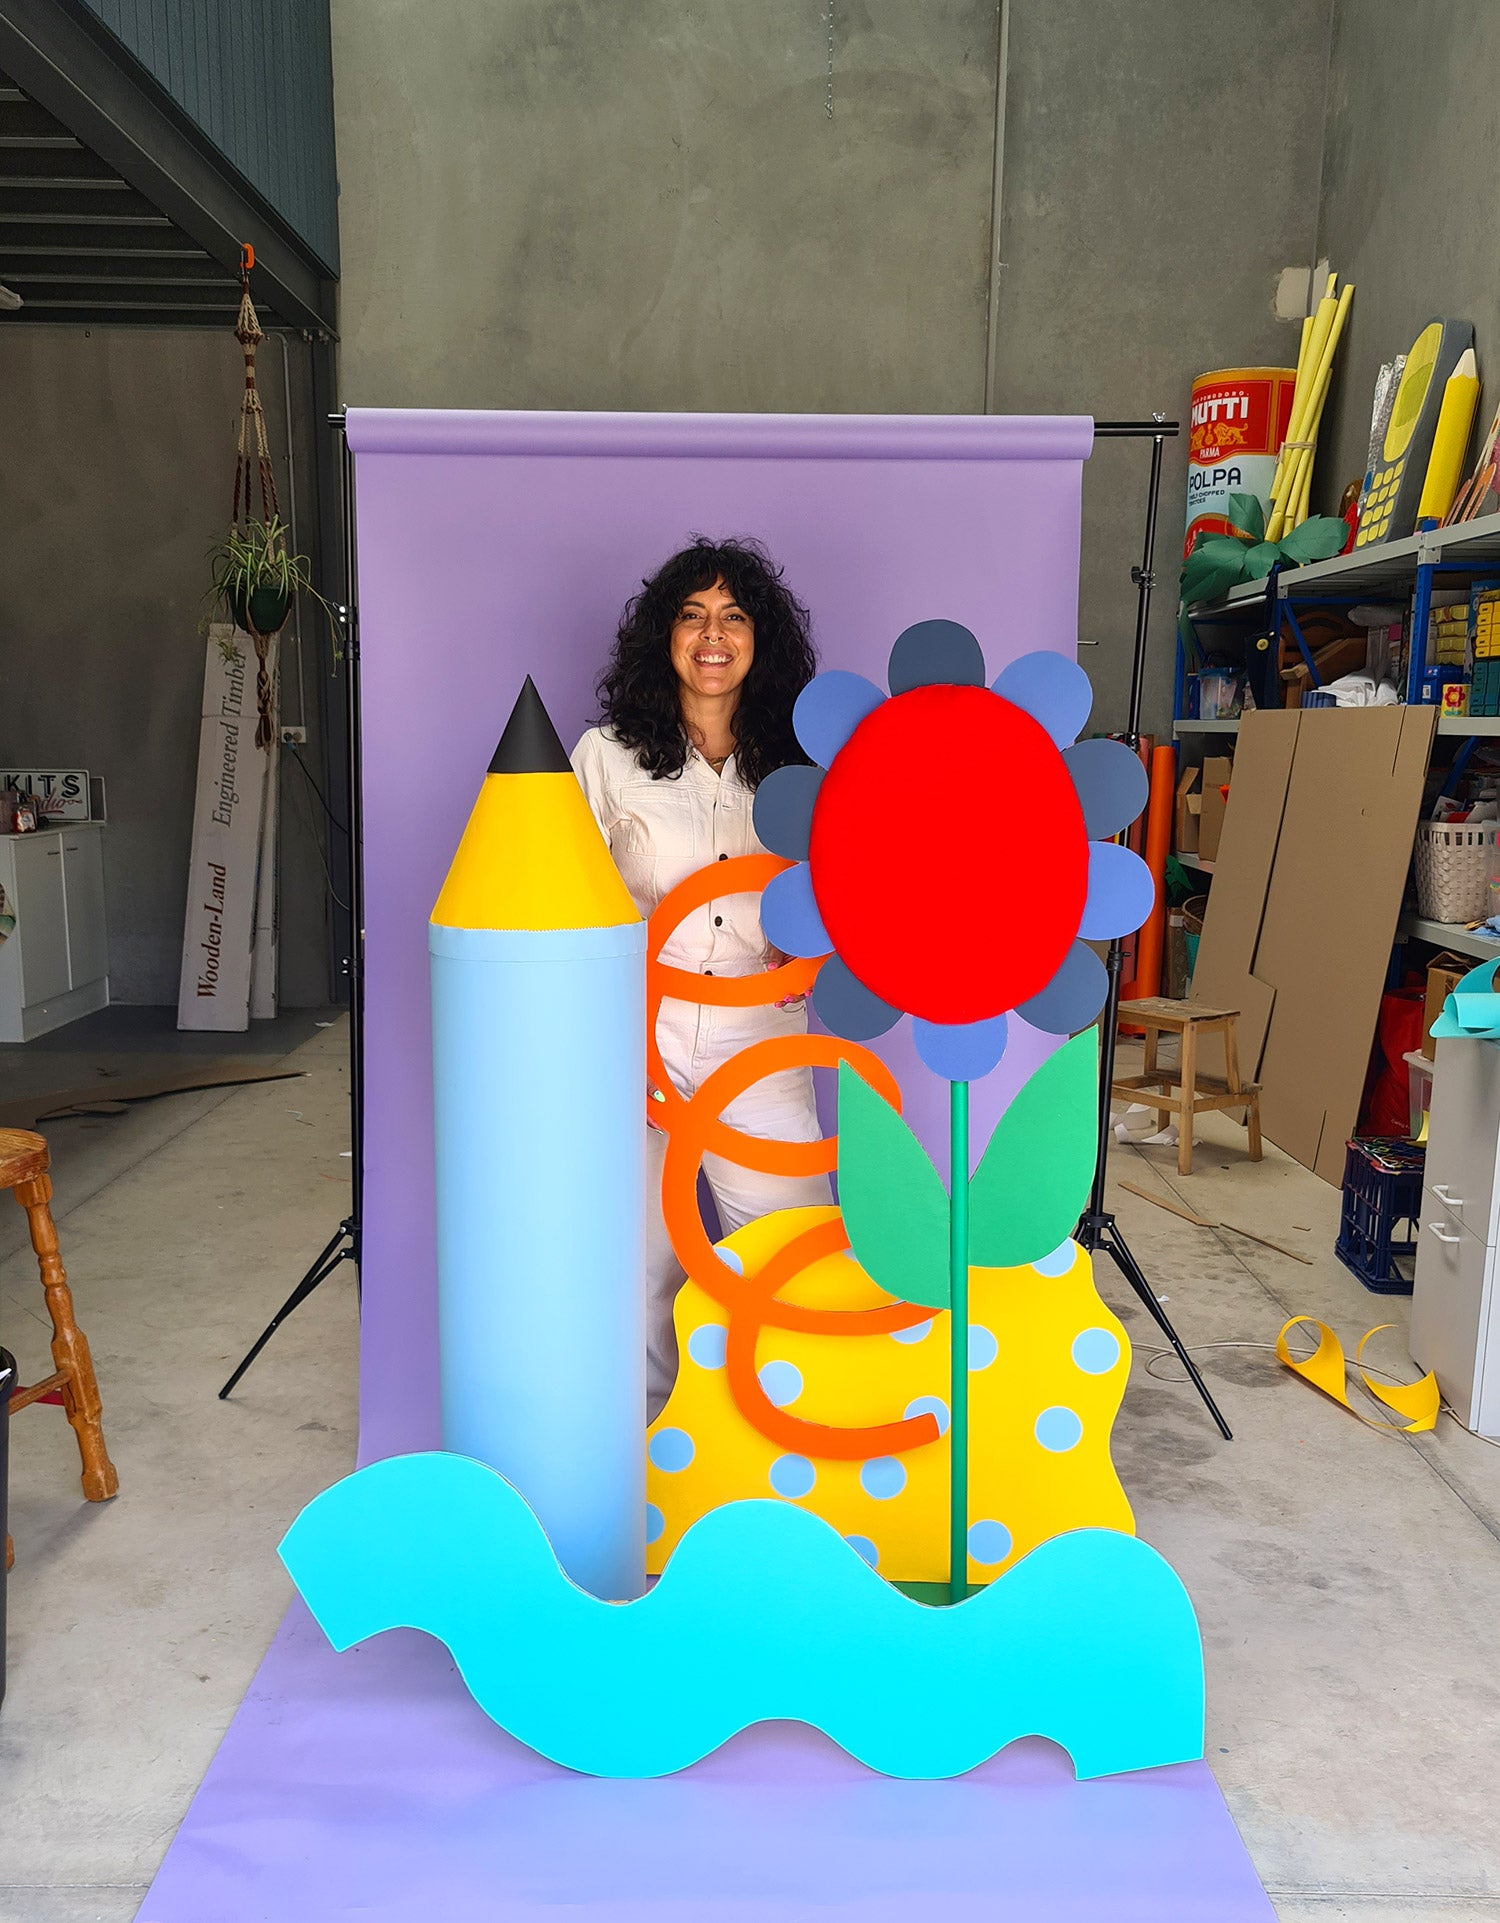 Kitiya, a woman with black hair and a white jumpsuit, stands in her design studio against a purple paper backdrop. Around her is a collection of playful, oversized cardboard props.